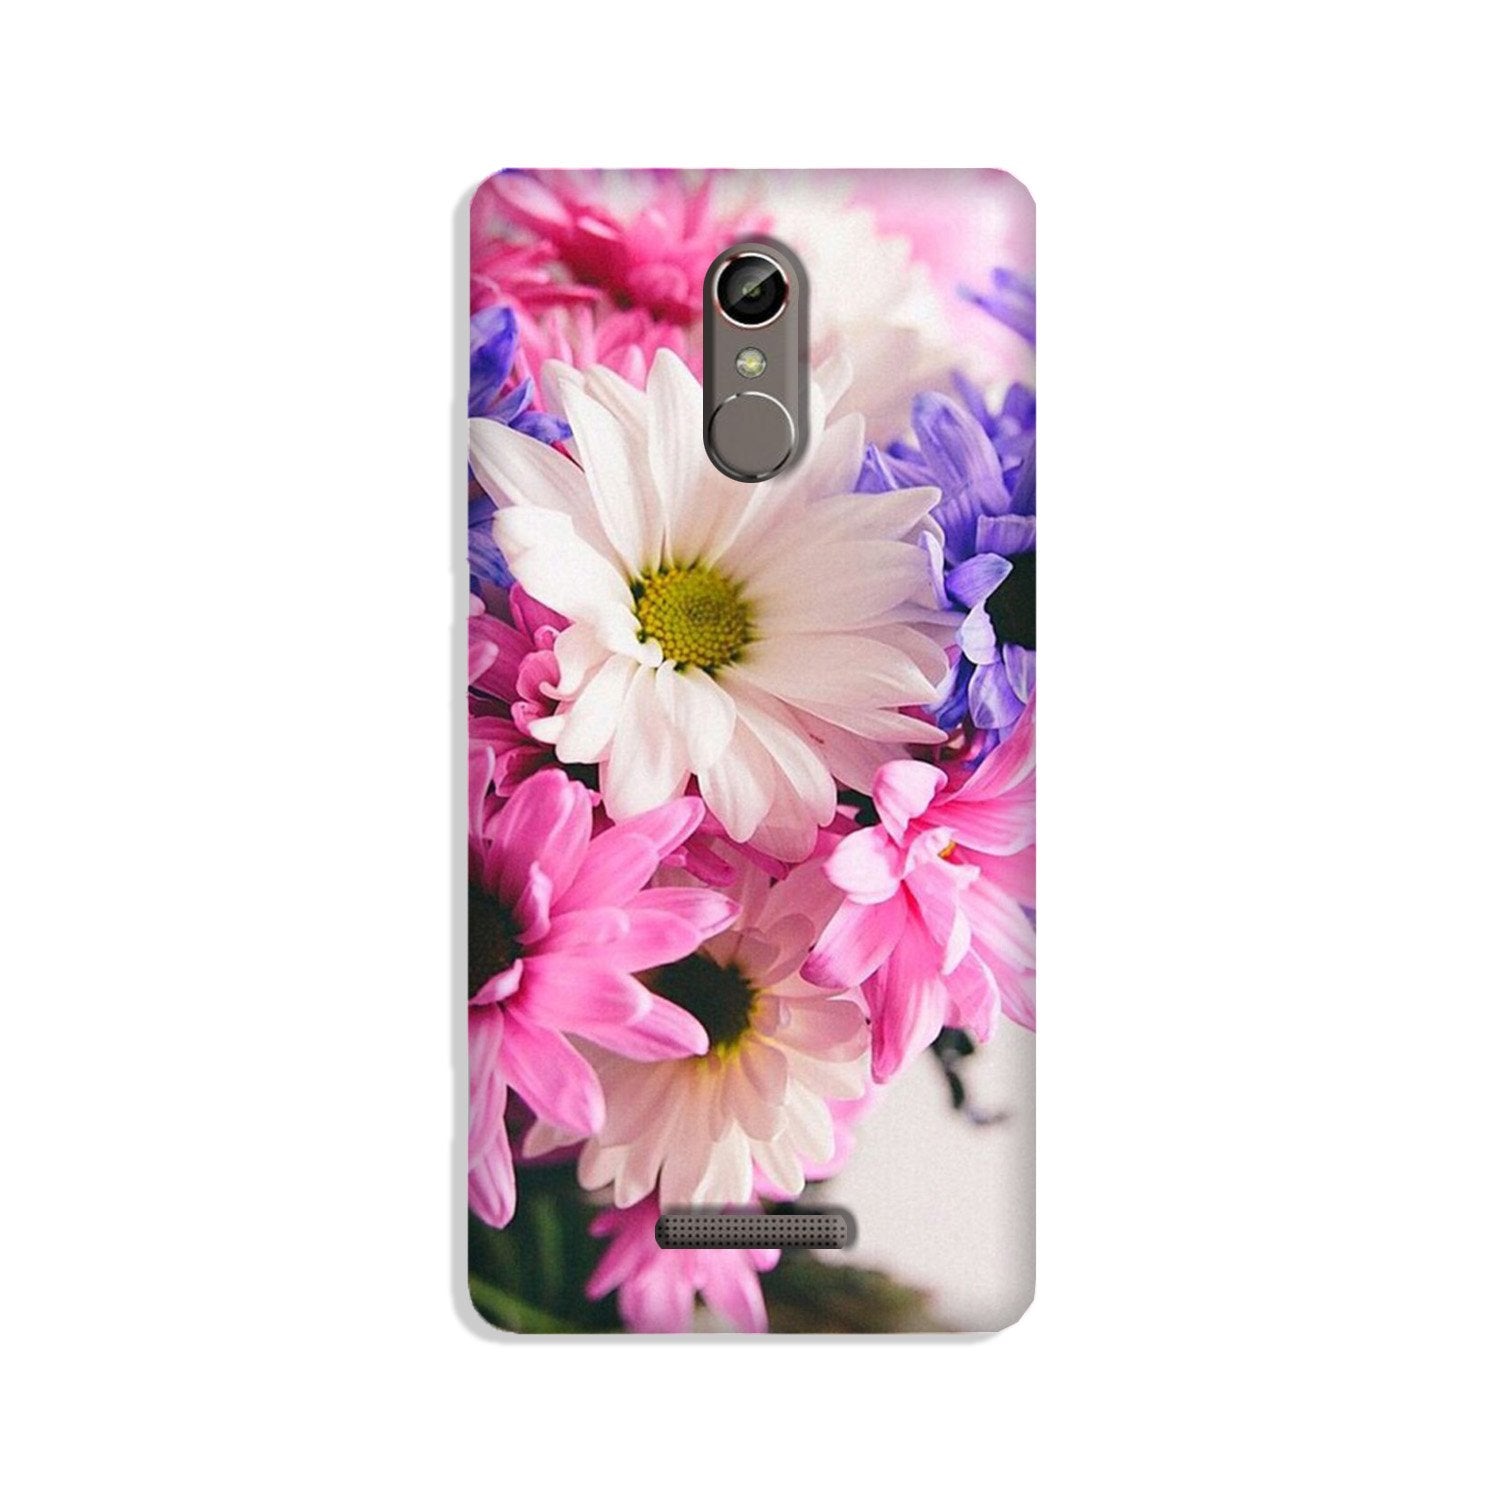 Coloful Daisy Case for Gionee S6s